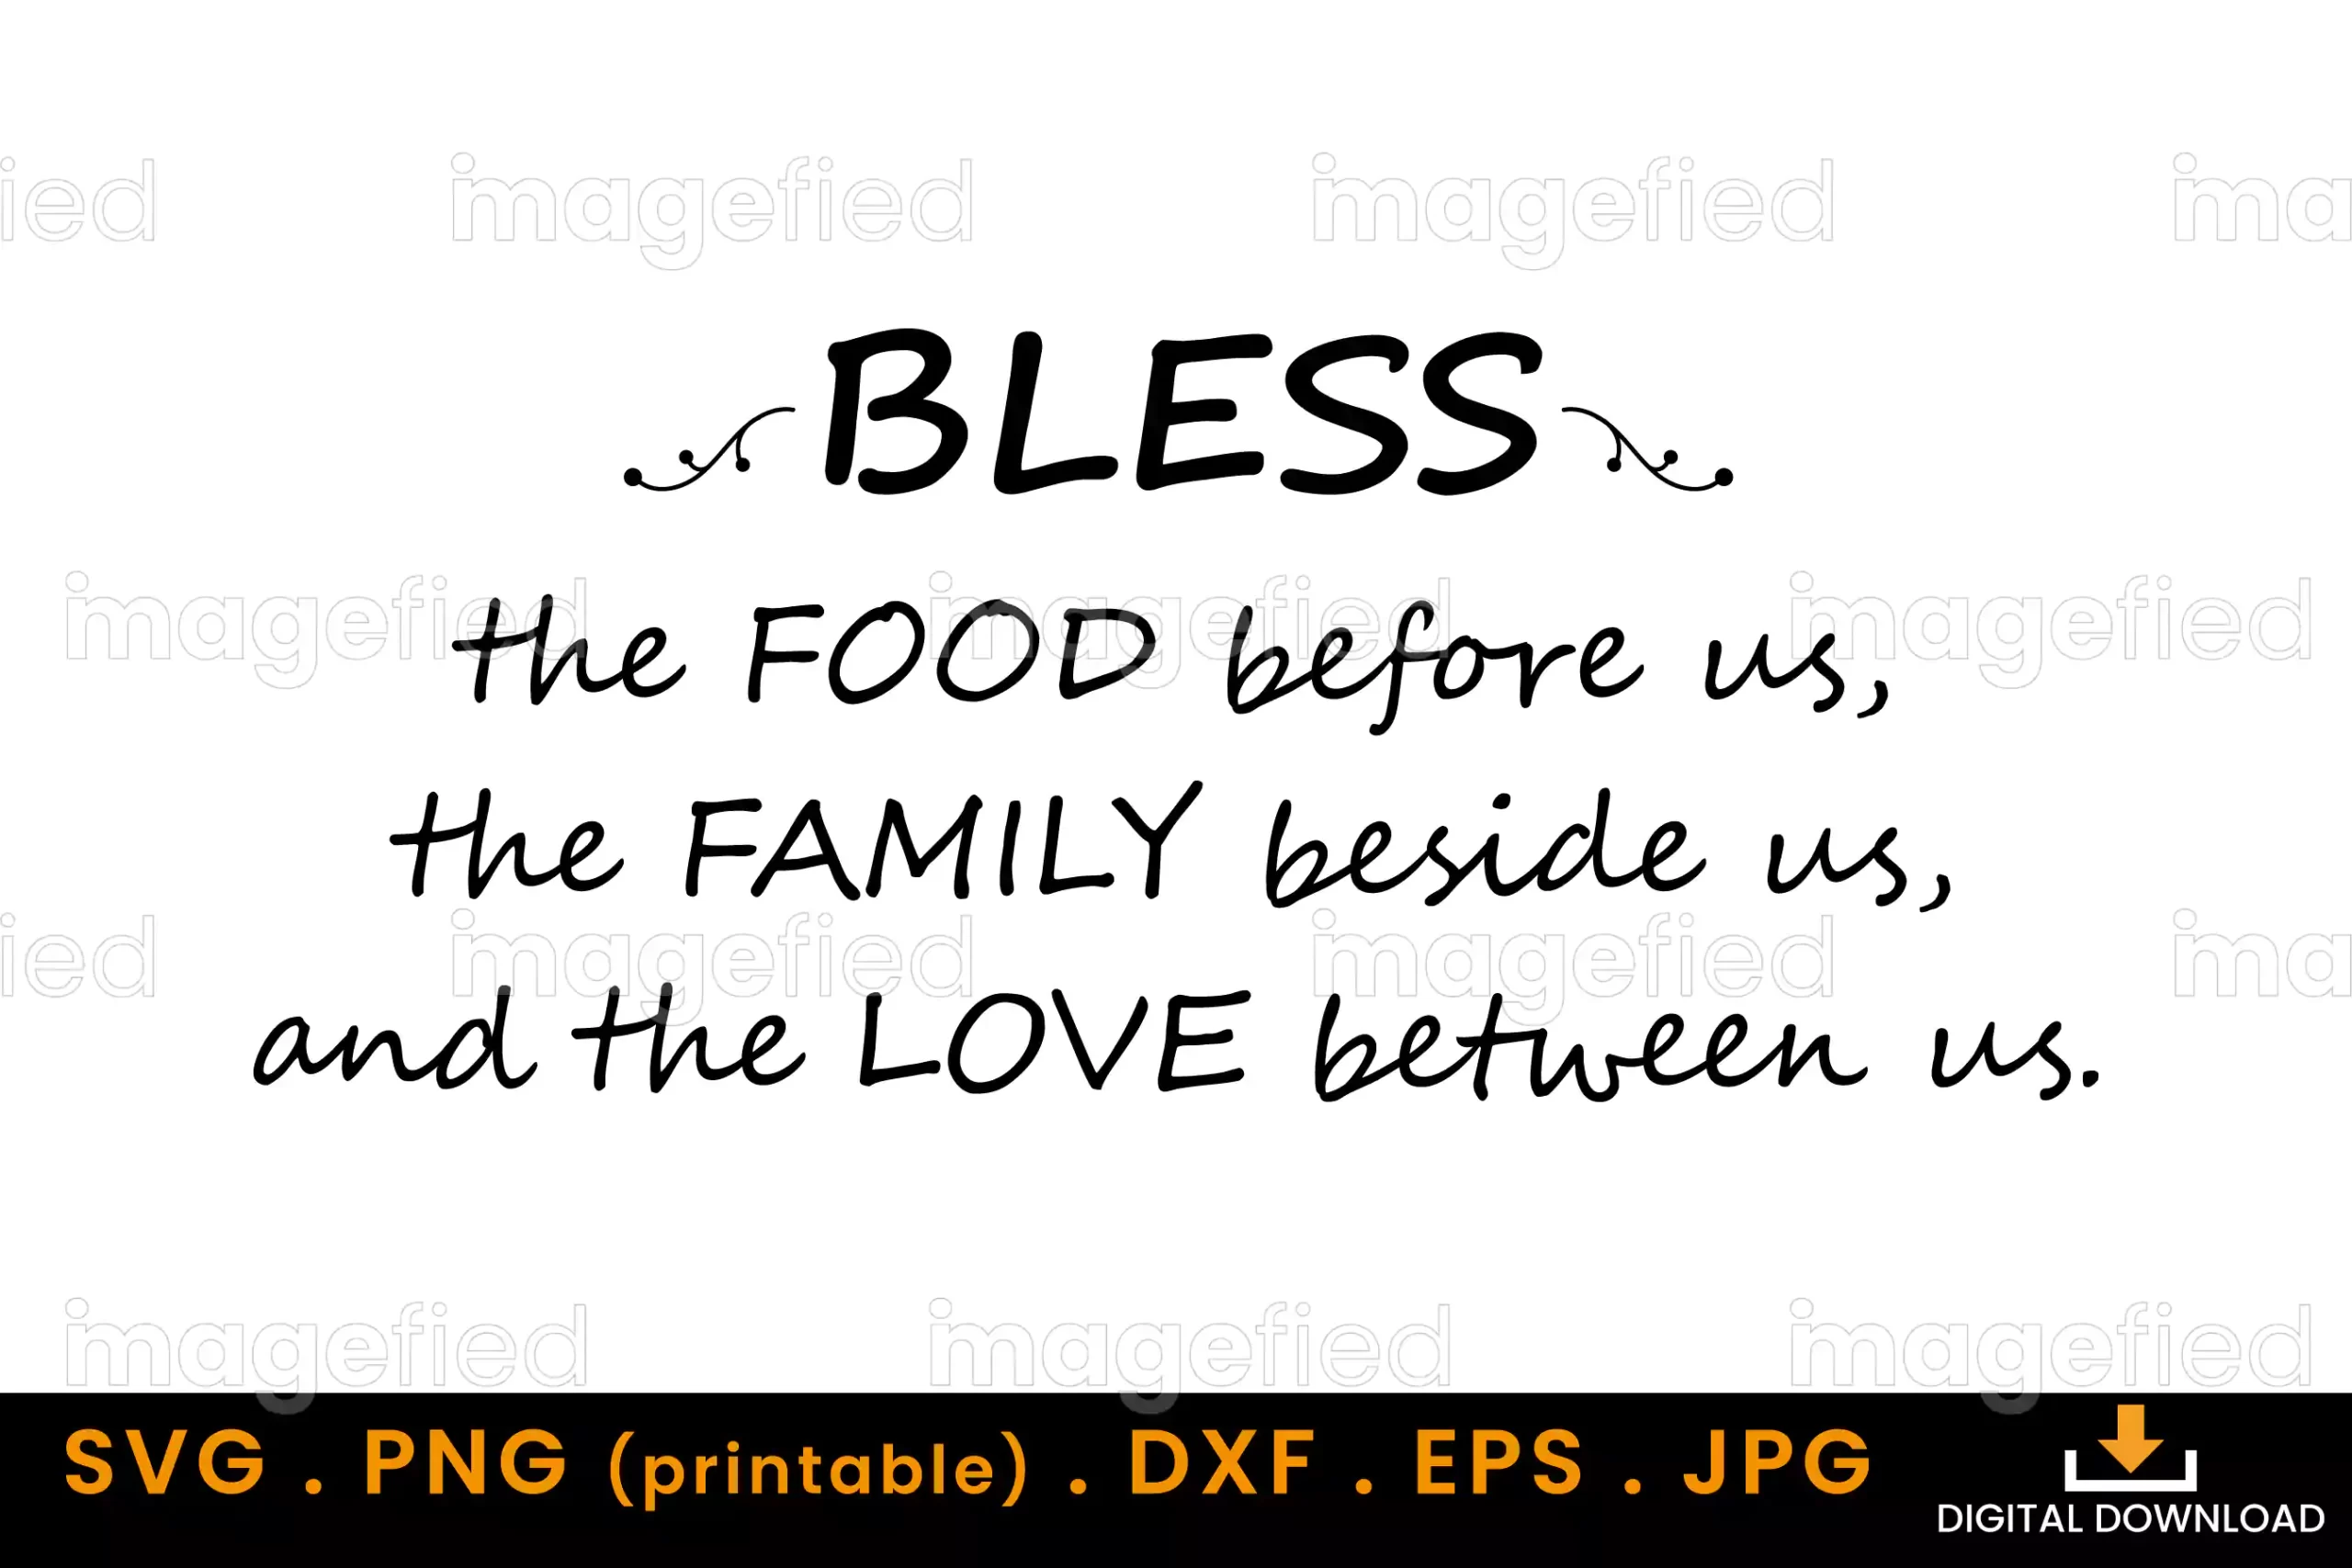 Bless the Food Before Us Svg, the Family Beside Us and the Love Between Us, Kitchen Quotes Dinner Blessings Svg, for Framed Wall Art, Cricut files